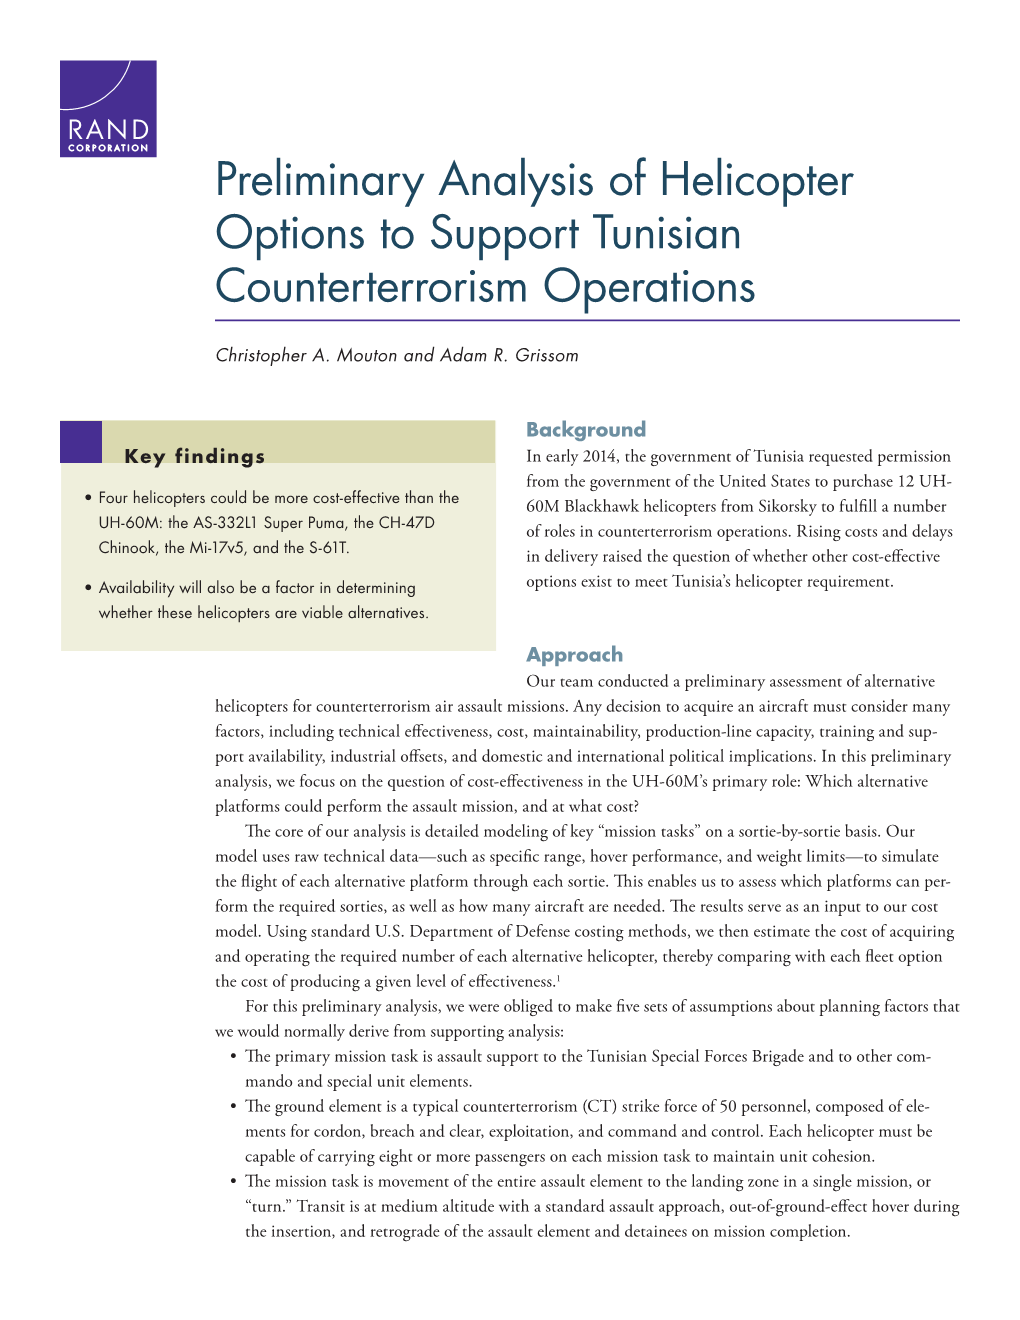 Preliminary Analysis of Helicopter Options to Support Tunisian Counterterrorism Operations